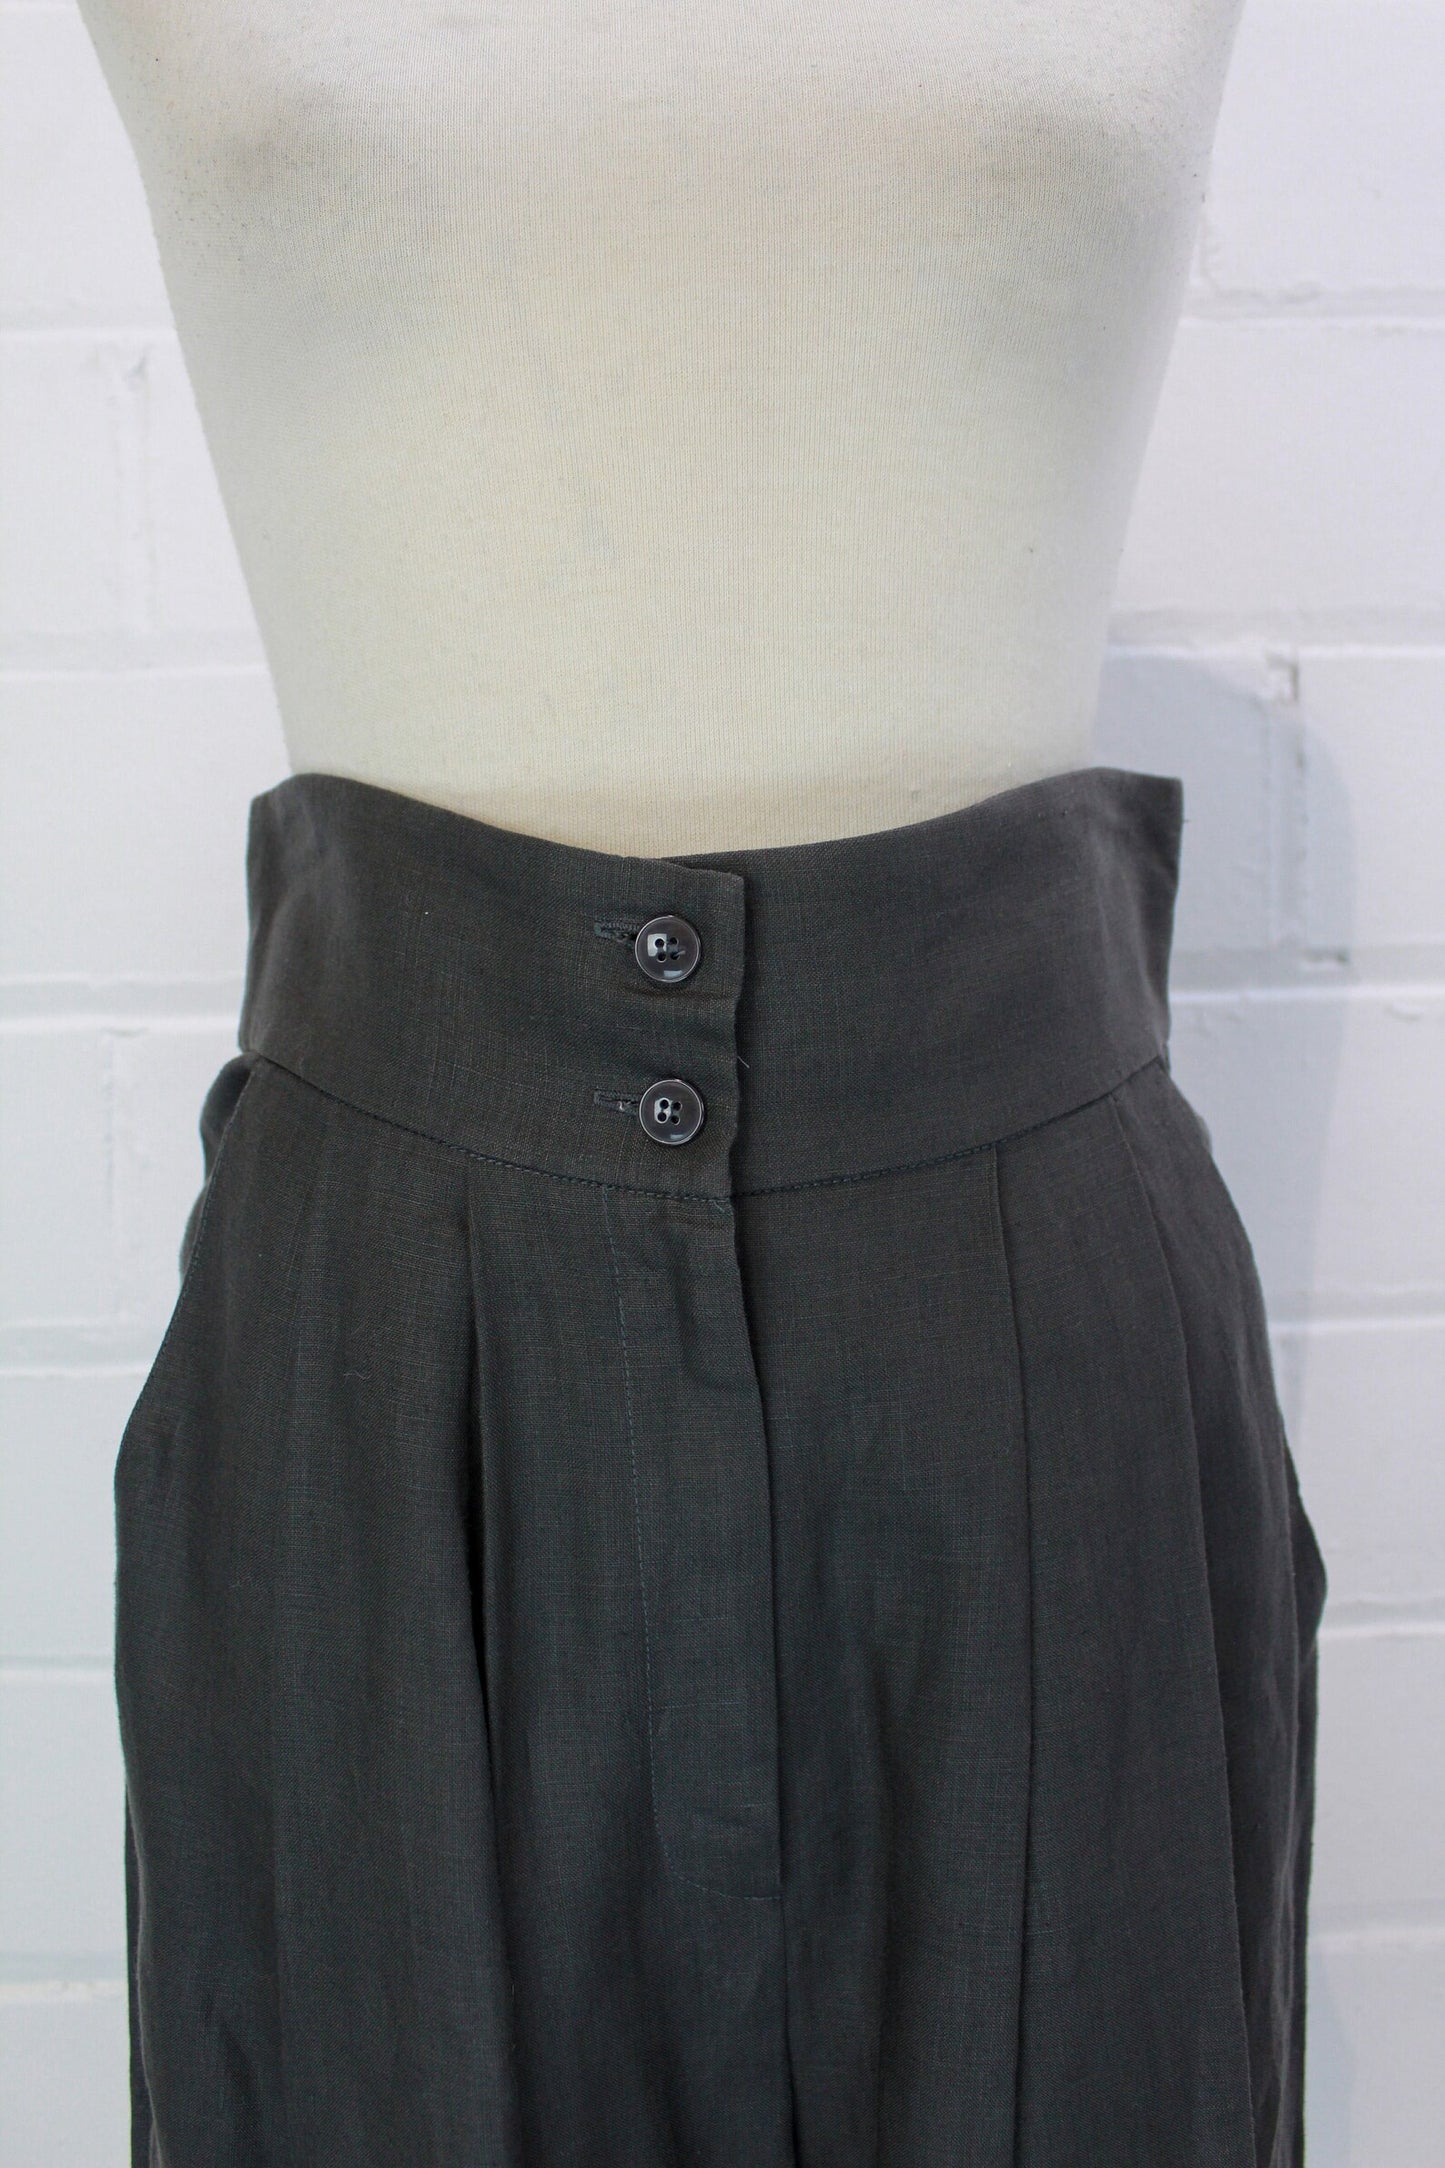 Vintage 1980s Linen Charcoal Bermuda Shorts, Dress Shorts, Business Casual Minimalist Shorts, Pleated Front, Available Sizes 27", 29"